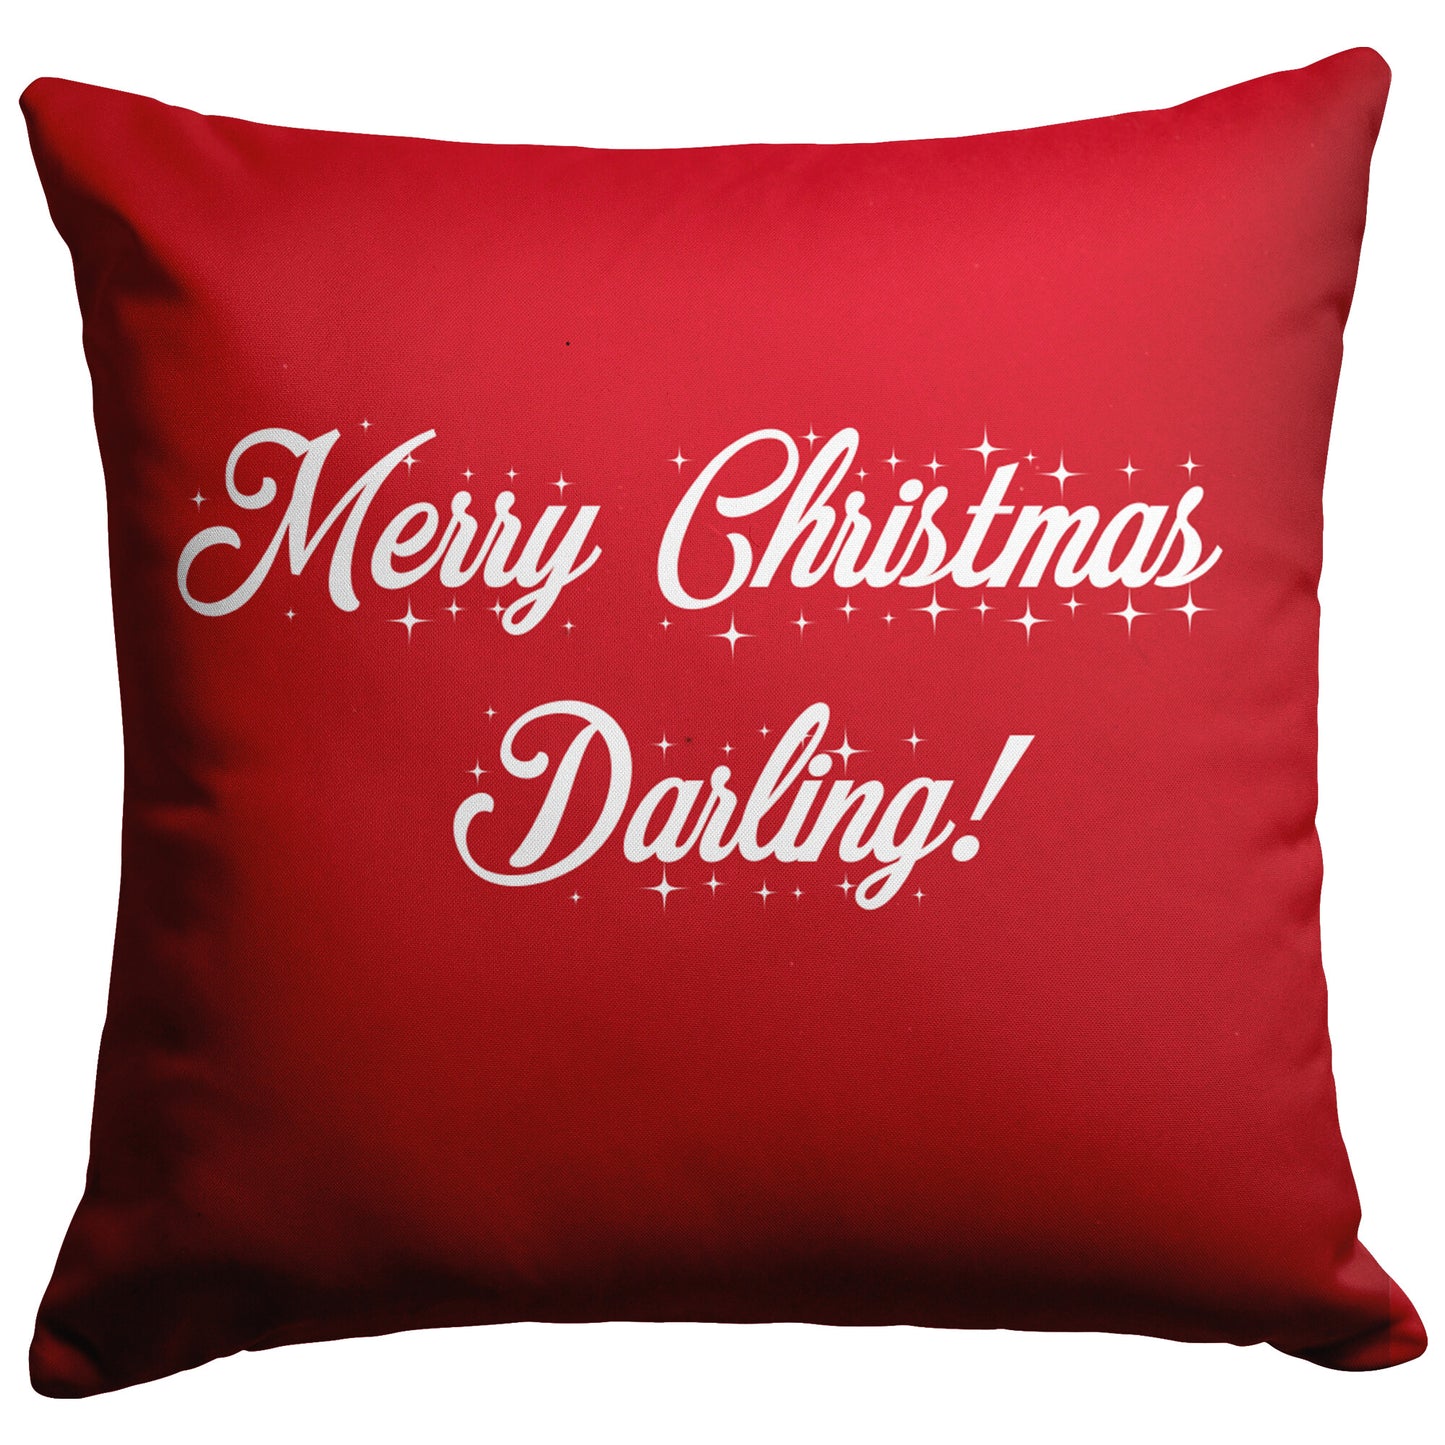 Merry Christmas Darling! Red/White Pillow - Signs and Seasons Gifts